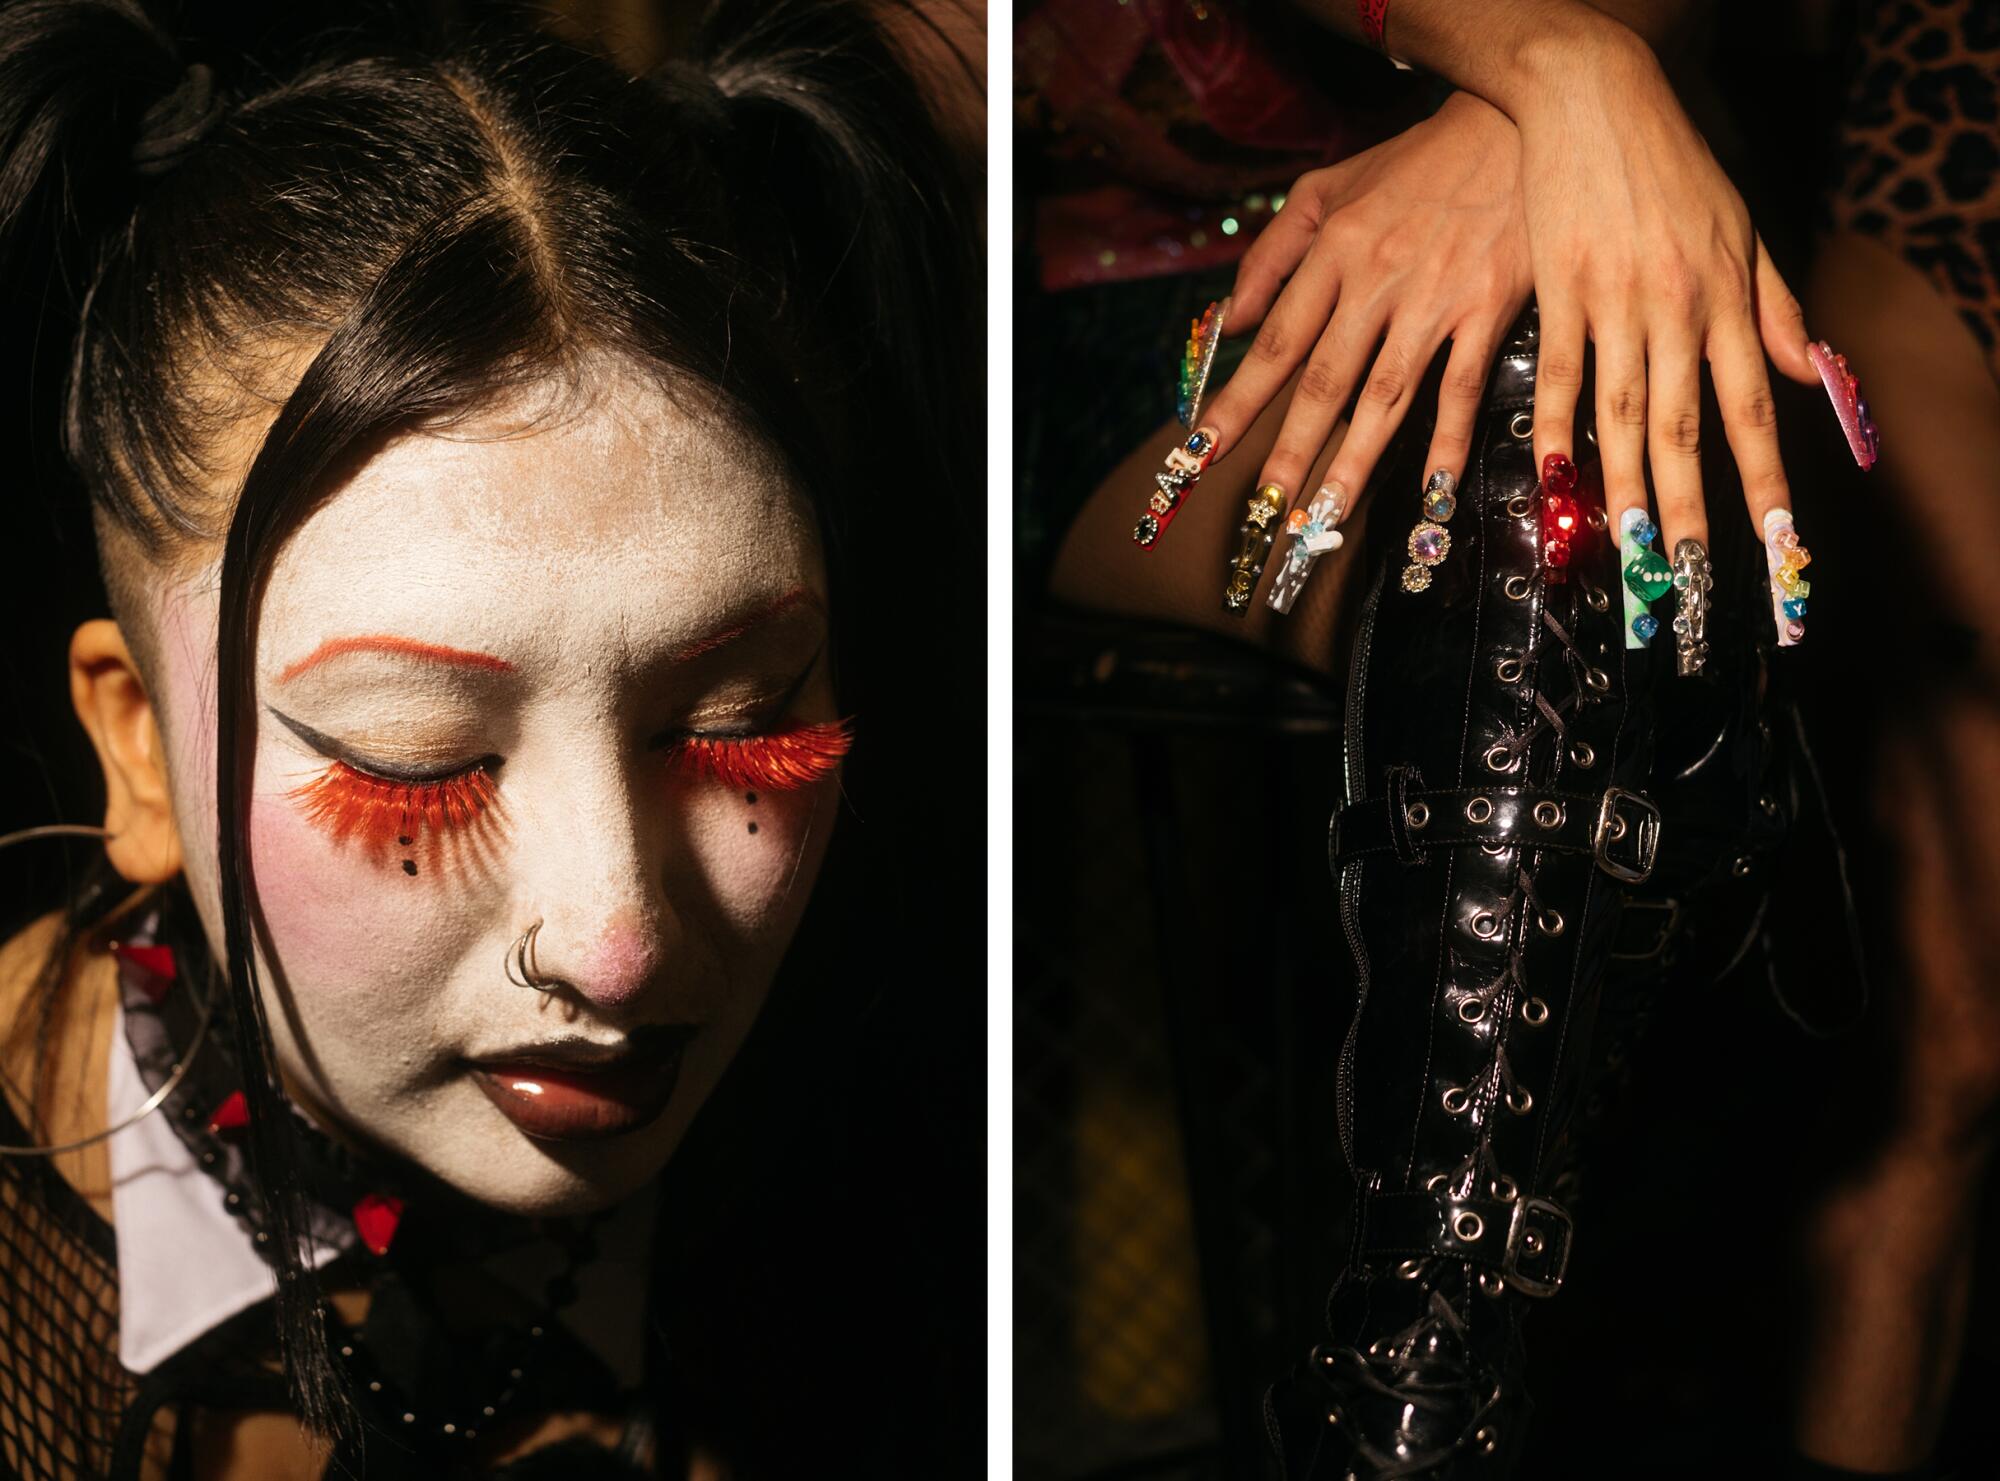 A person with white face makeup and red eyelashes, left, and two hands crossed, showing off stunning fingernails, right.